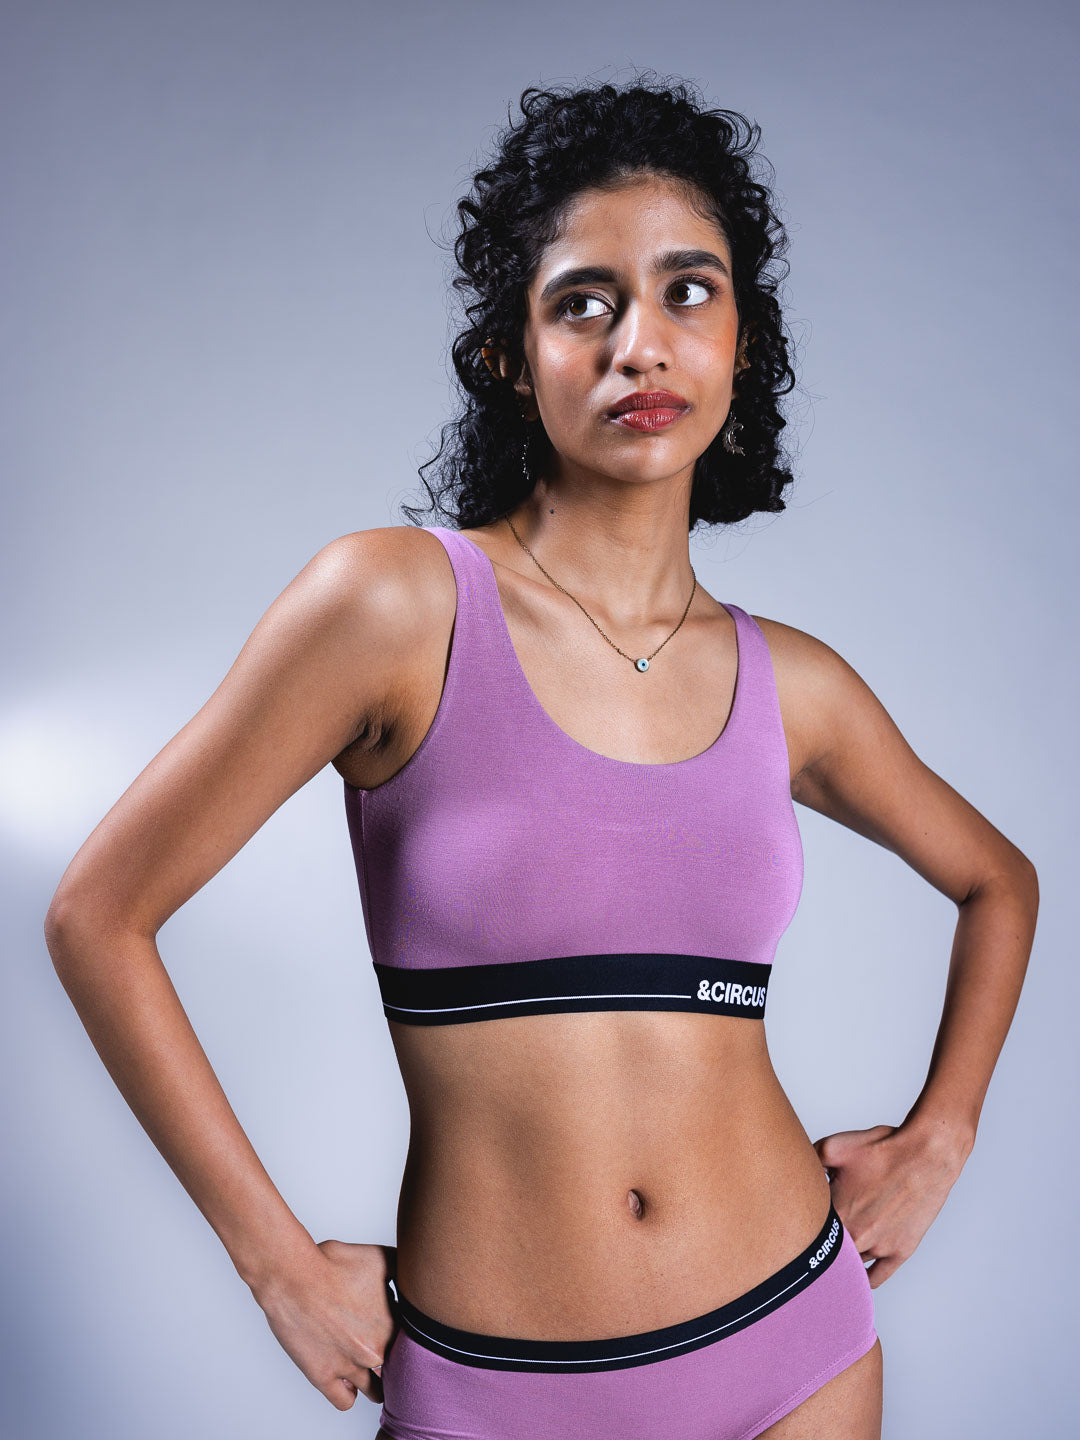 What is the best high impact sports bra in India? - Quora